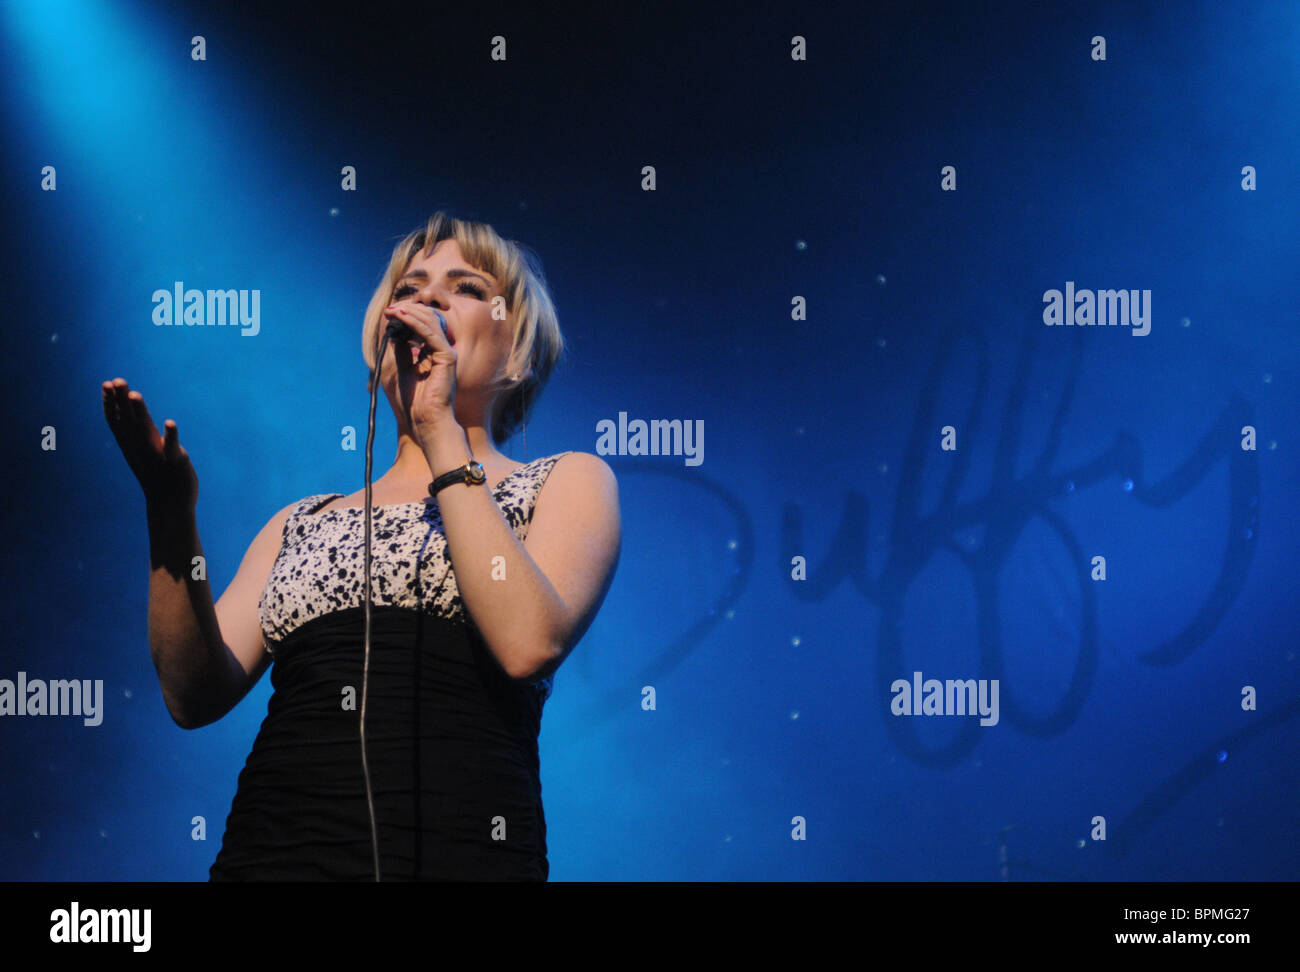 Duffy Singer High Resolution Stock Photography and Images - Alamy